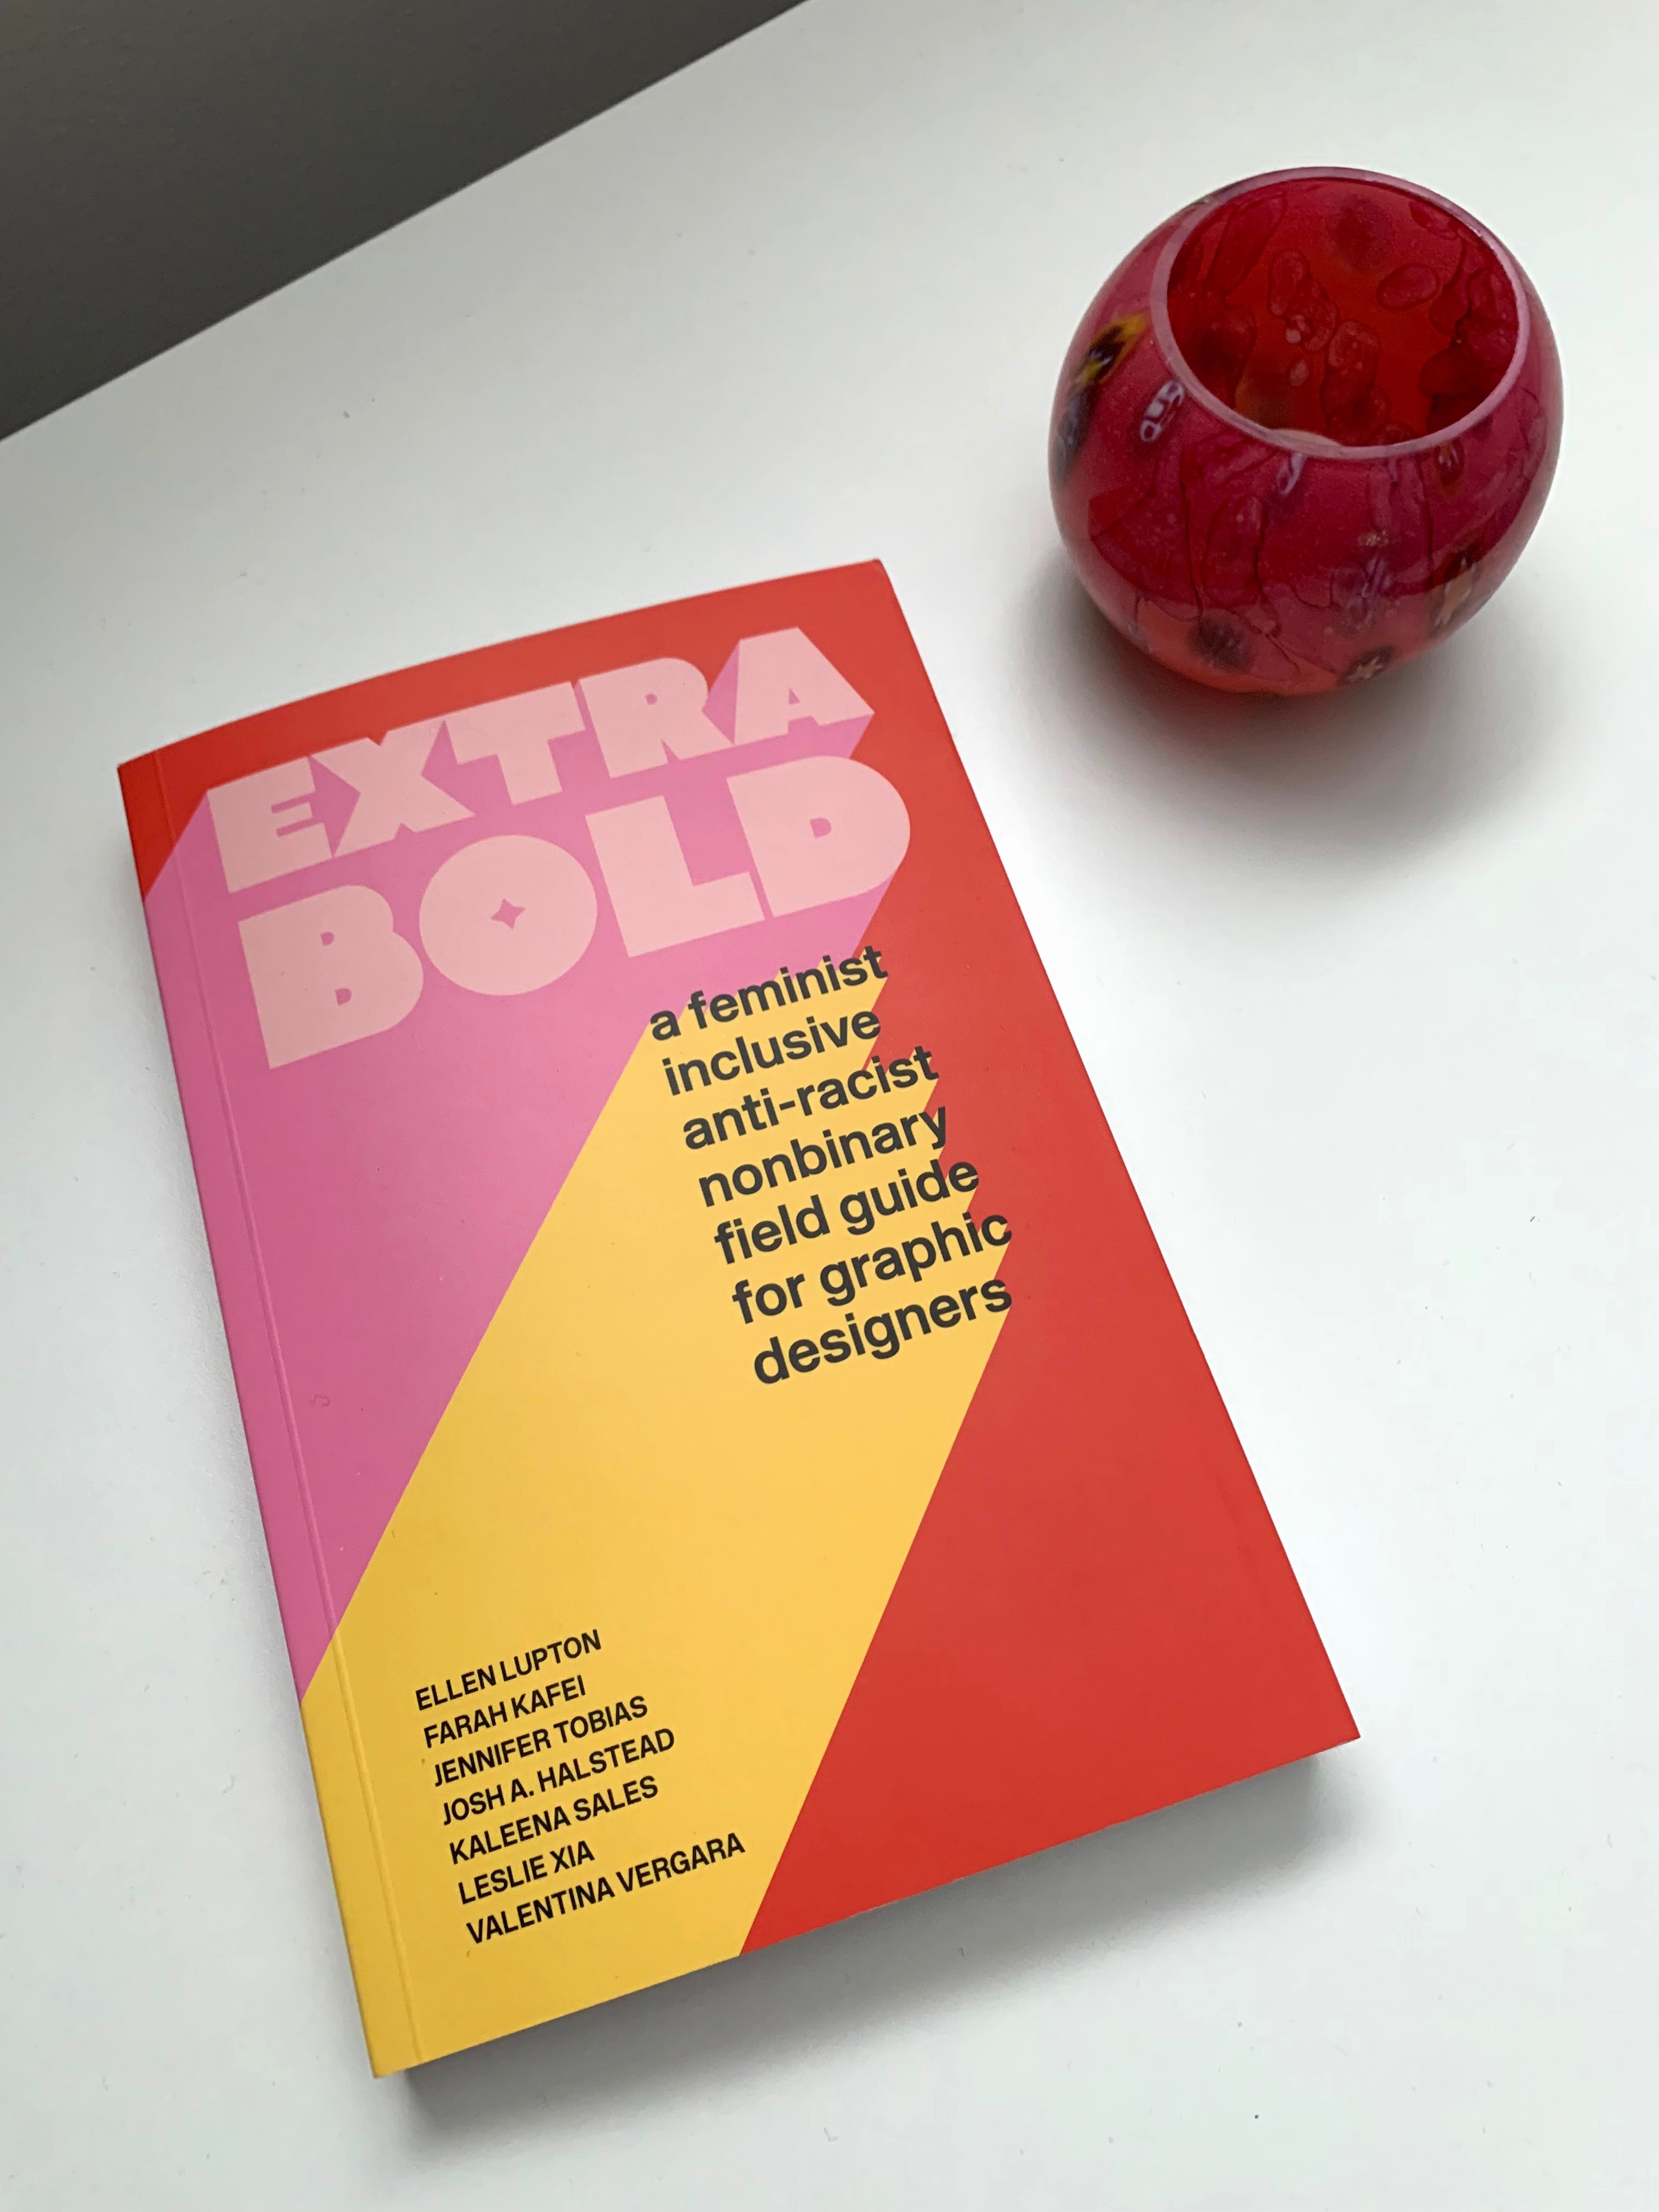 The book "Extra Bold" sits on a white desktop to the left of a pink candle holder.